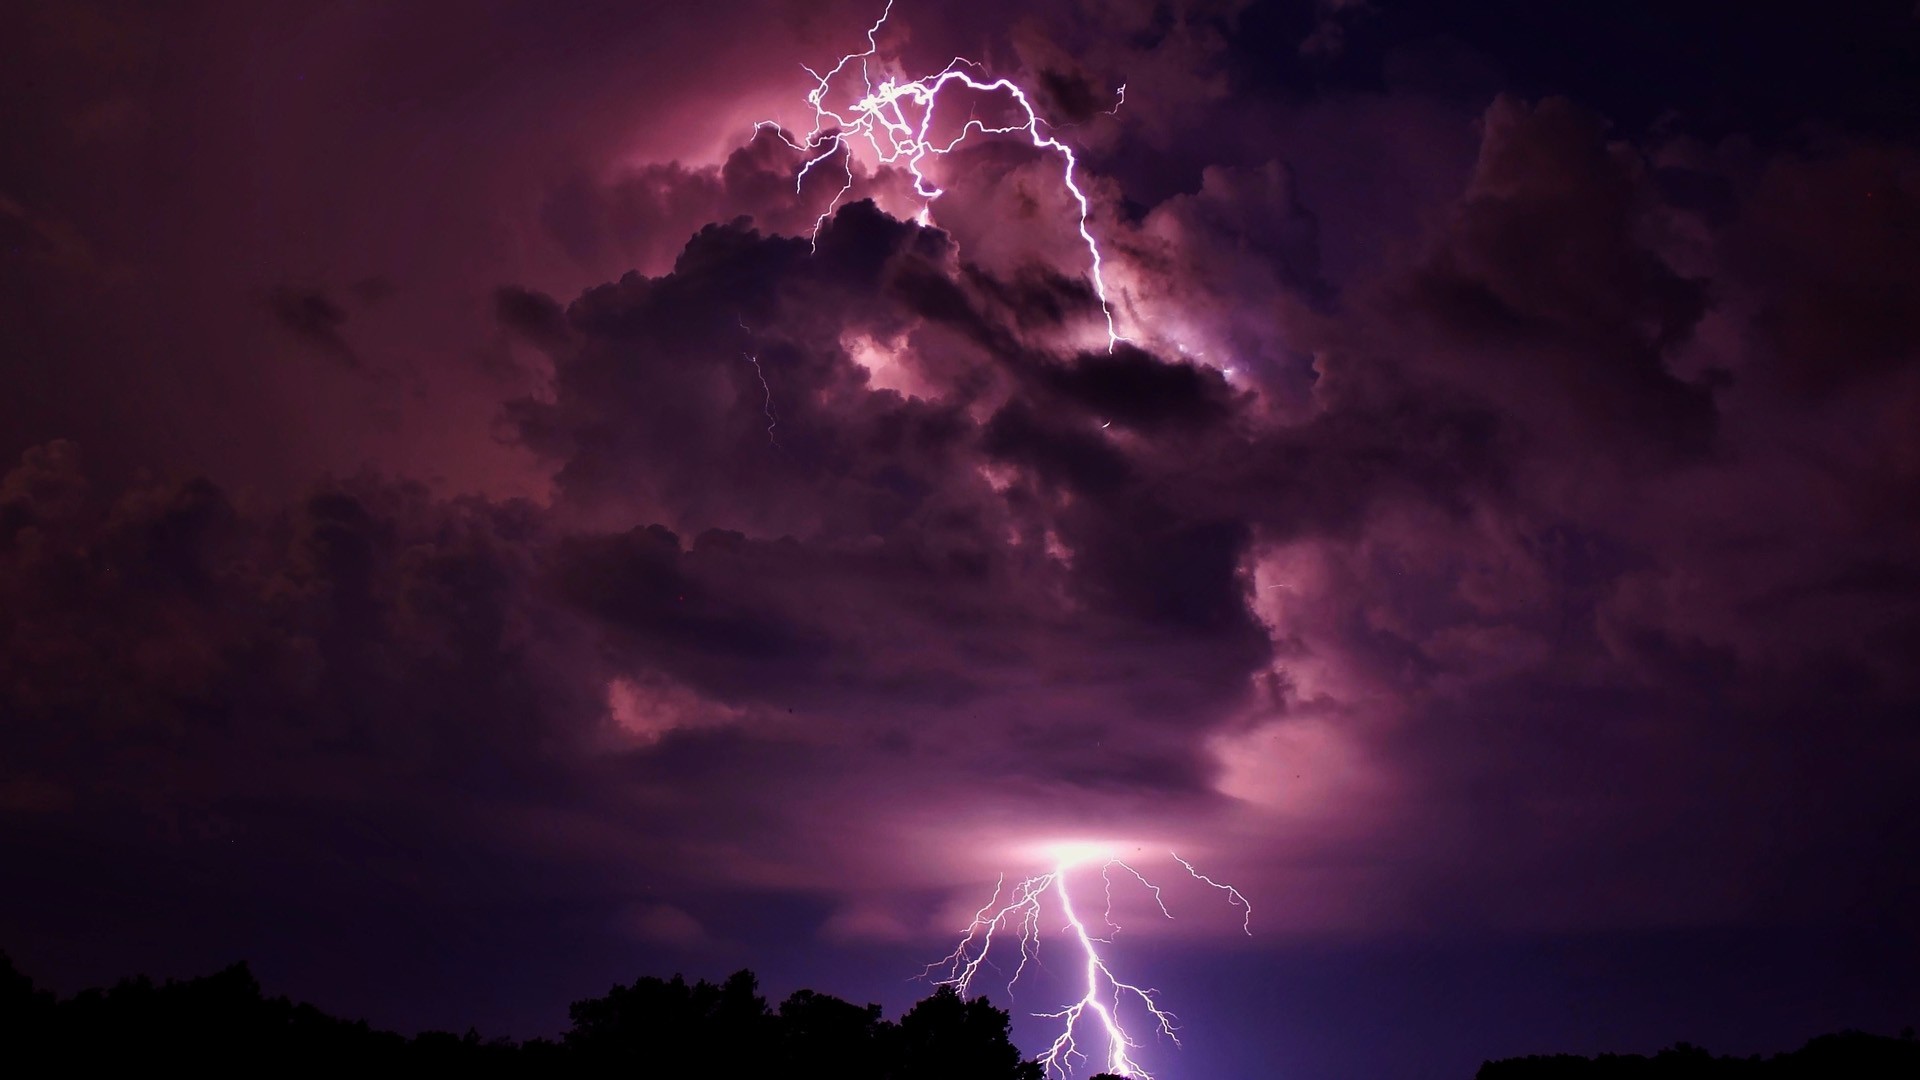 Free download Description Lightning Wallpaper HD is a hi res Wallpaper for  pc [1920x1080] for your Desktop, Mobile & Tablet | Explore 74+ Lightning  Wallpaper | Lightning Backgrounds, Lightning Bolt Backgrounds, Lightning  Background